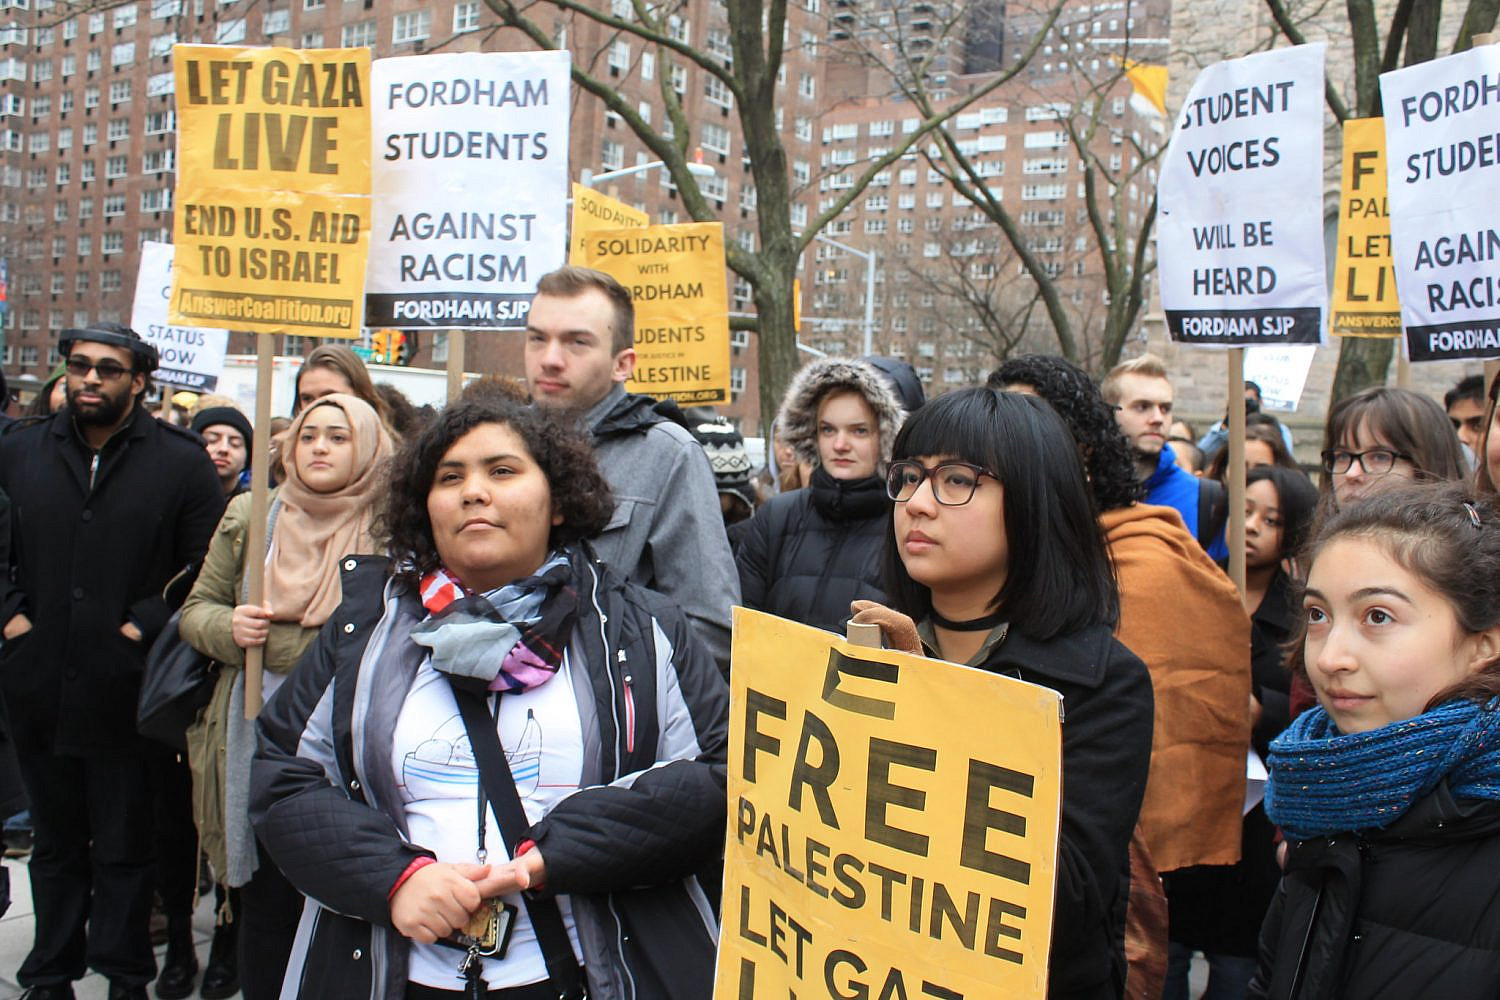 Fordham University students demonstrate on behalf of freedom in Palestine and free speech on campus.